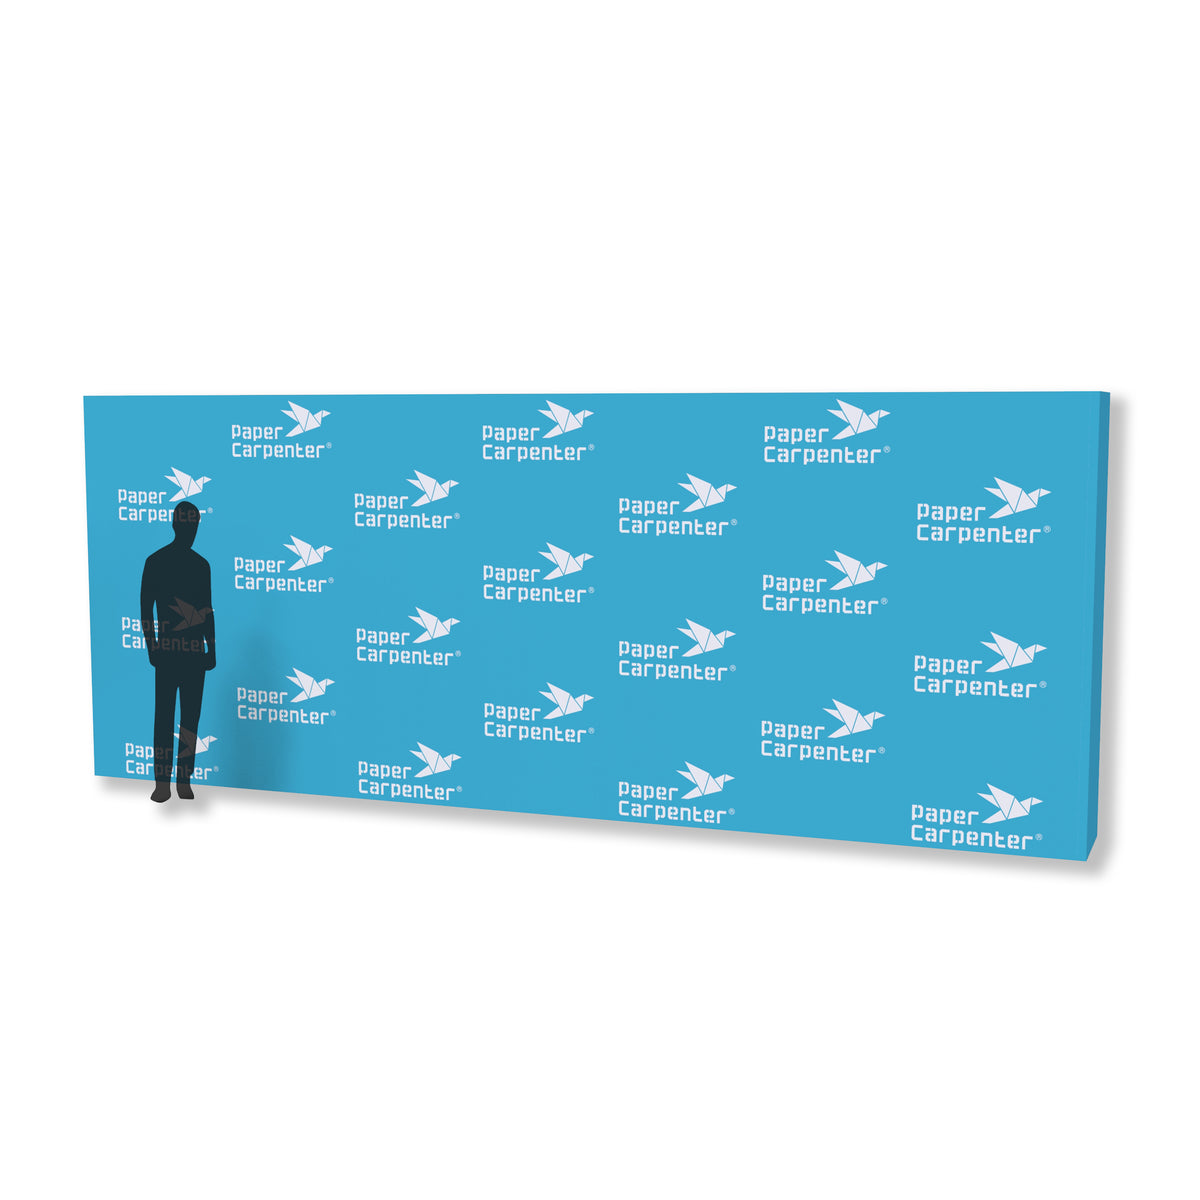 8ft x 20ft Backdrop with PaperConnect Structure (Reusable)